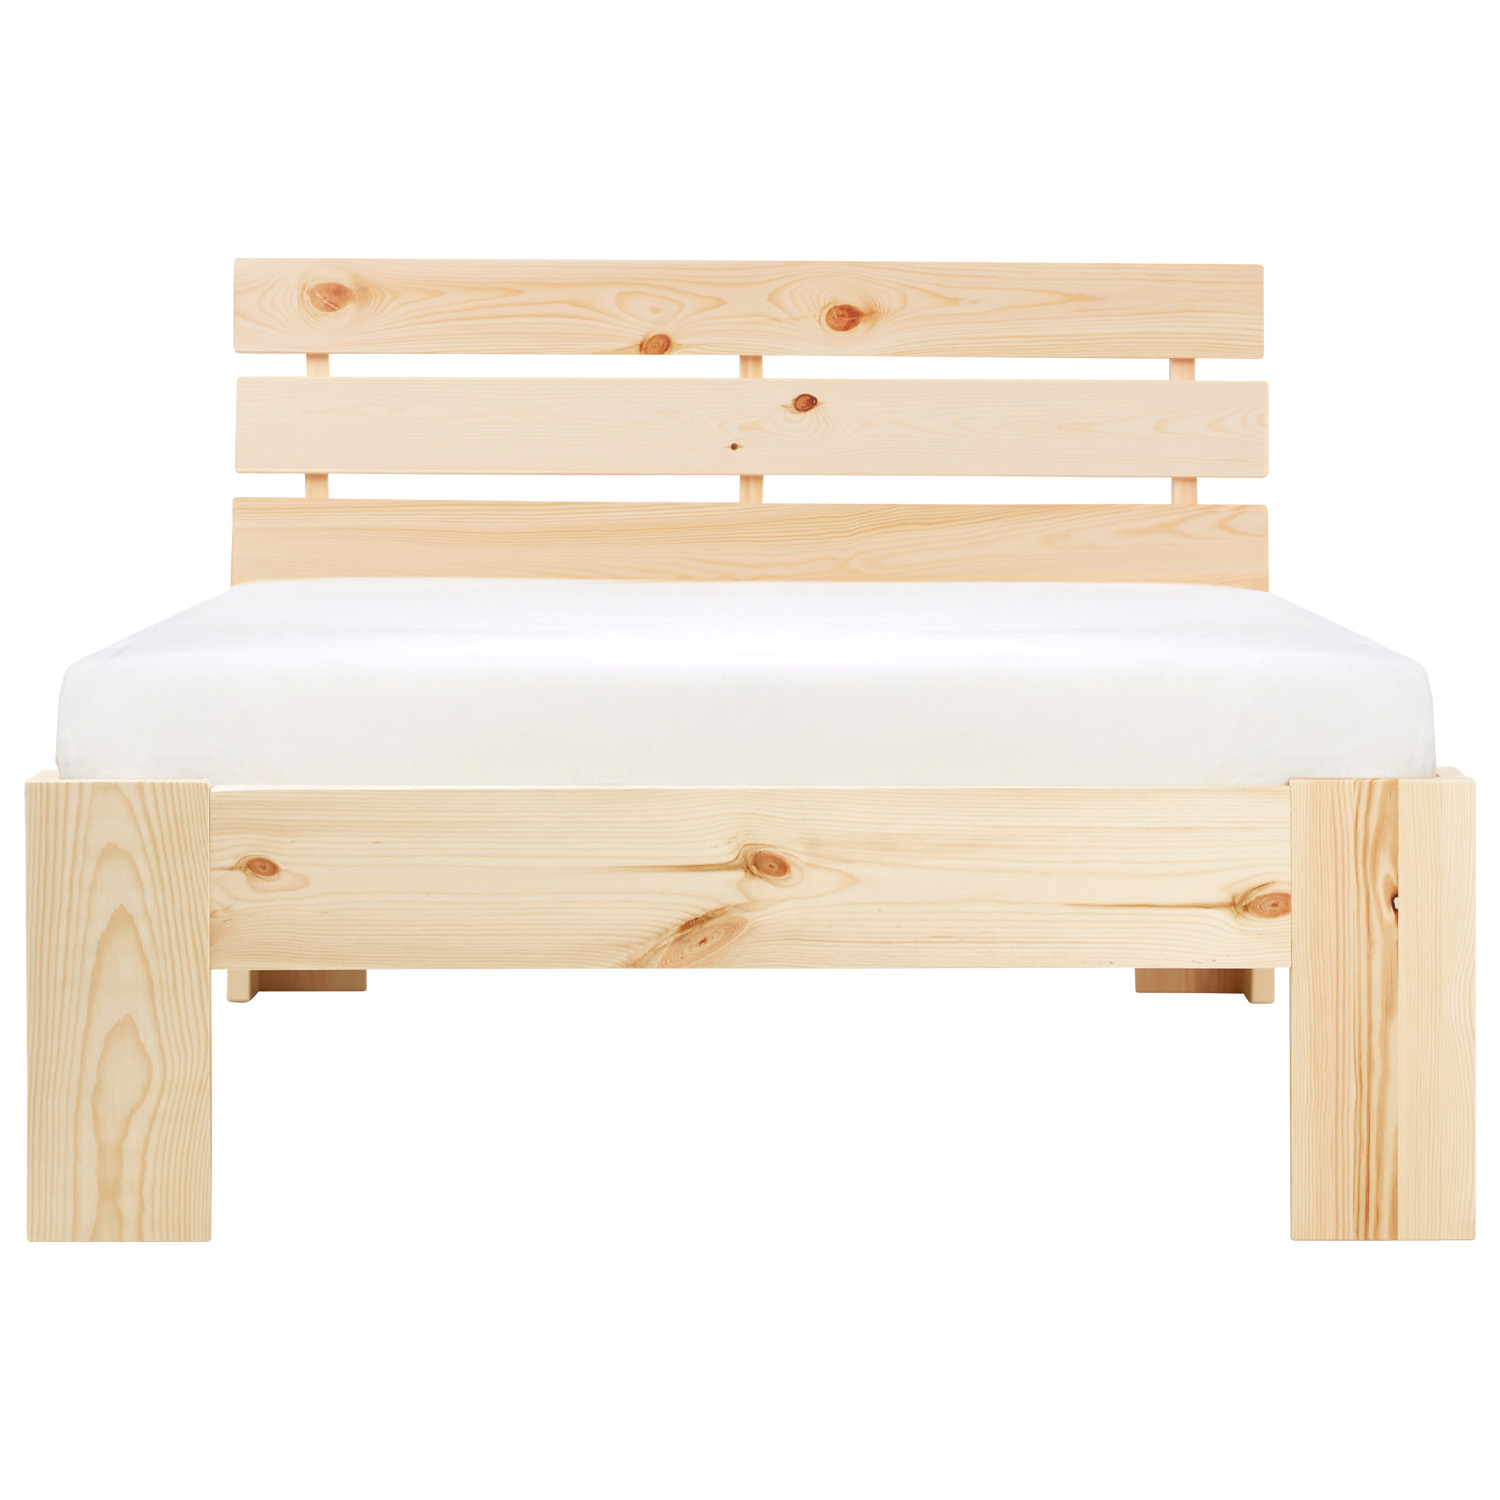 Single Bed Wooden Bed 90x200 with Slatted Frame Natural Pine Bed Bedstead Solid Wood